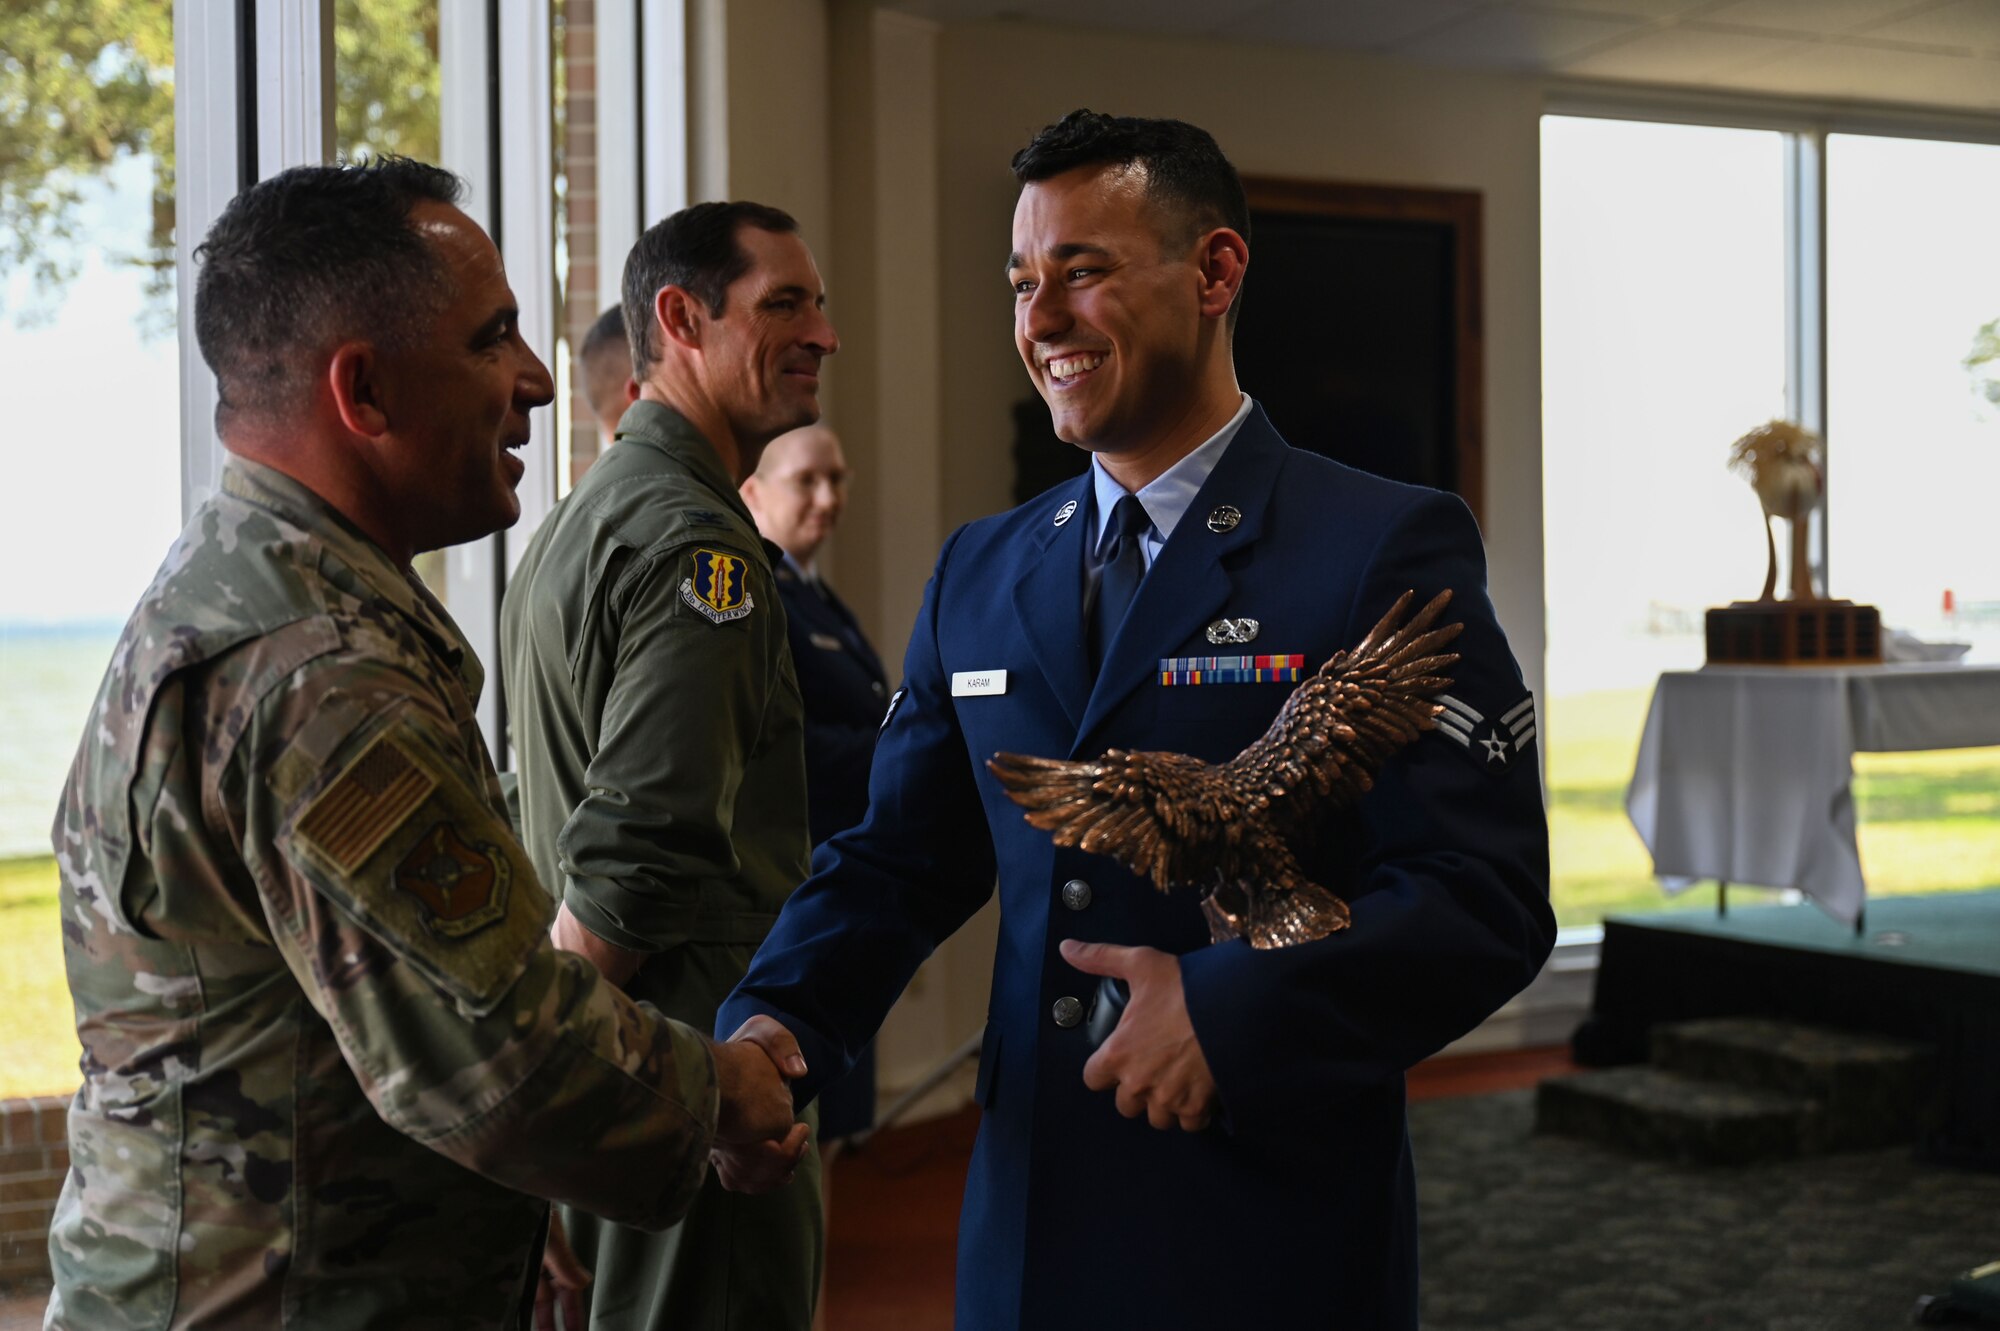 Senior Airman Anthony Karam, 16th Electronic Warfare Squadron avionics technician, right, shakes U.S. Air Force Col. Josh Koslov, 350th Spectrum Warfare commander, left, during Airman Leadership School (ALS) class 23-D graduation at Eglin Air Force Base, Fla., May 11, 2023. Karama won the John L. Levitow Award, which is the highest award for enlisted Professional Military Education in the Air Force. (U.S. Air Force photo by Staff Sgt. Ericka A. Woolever)